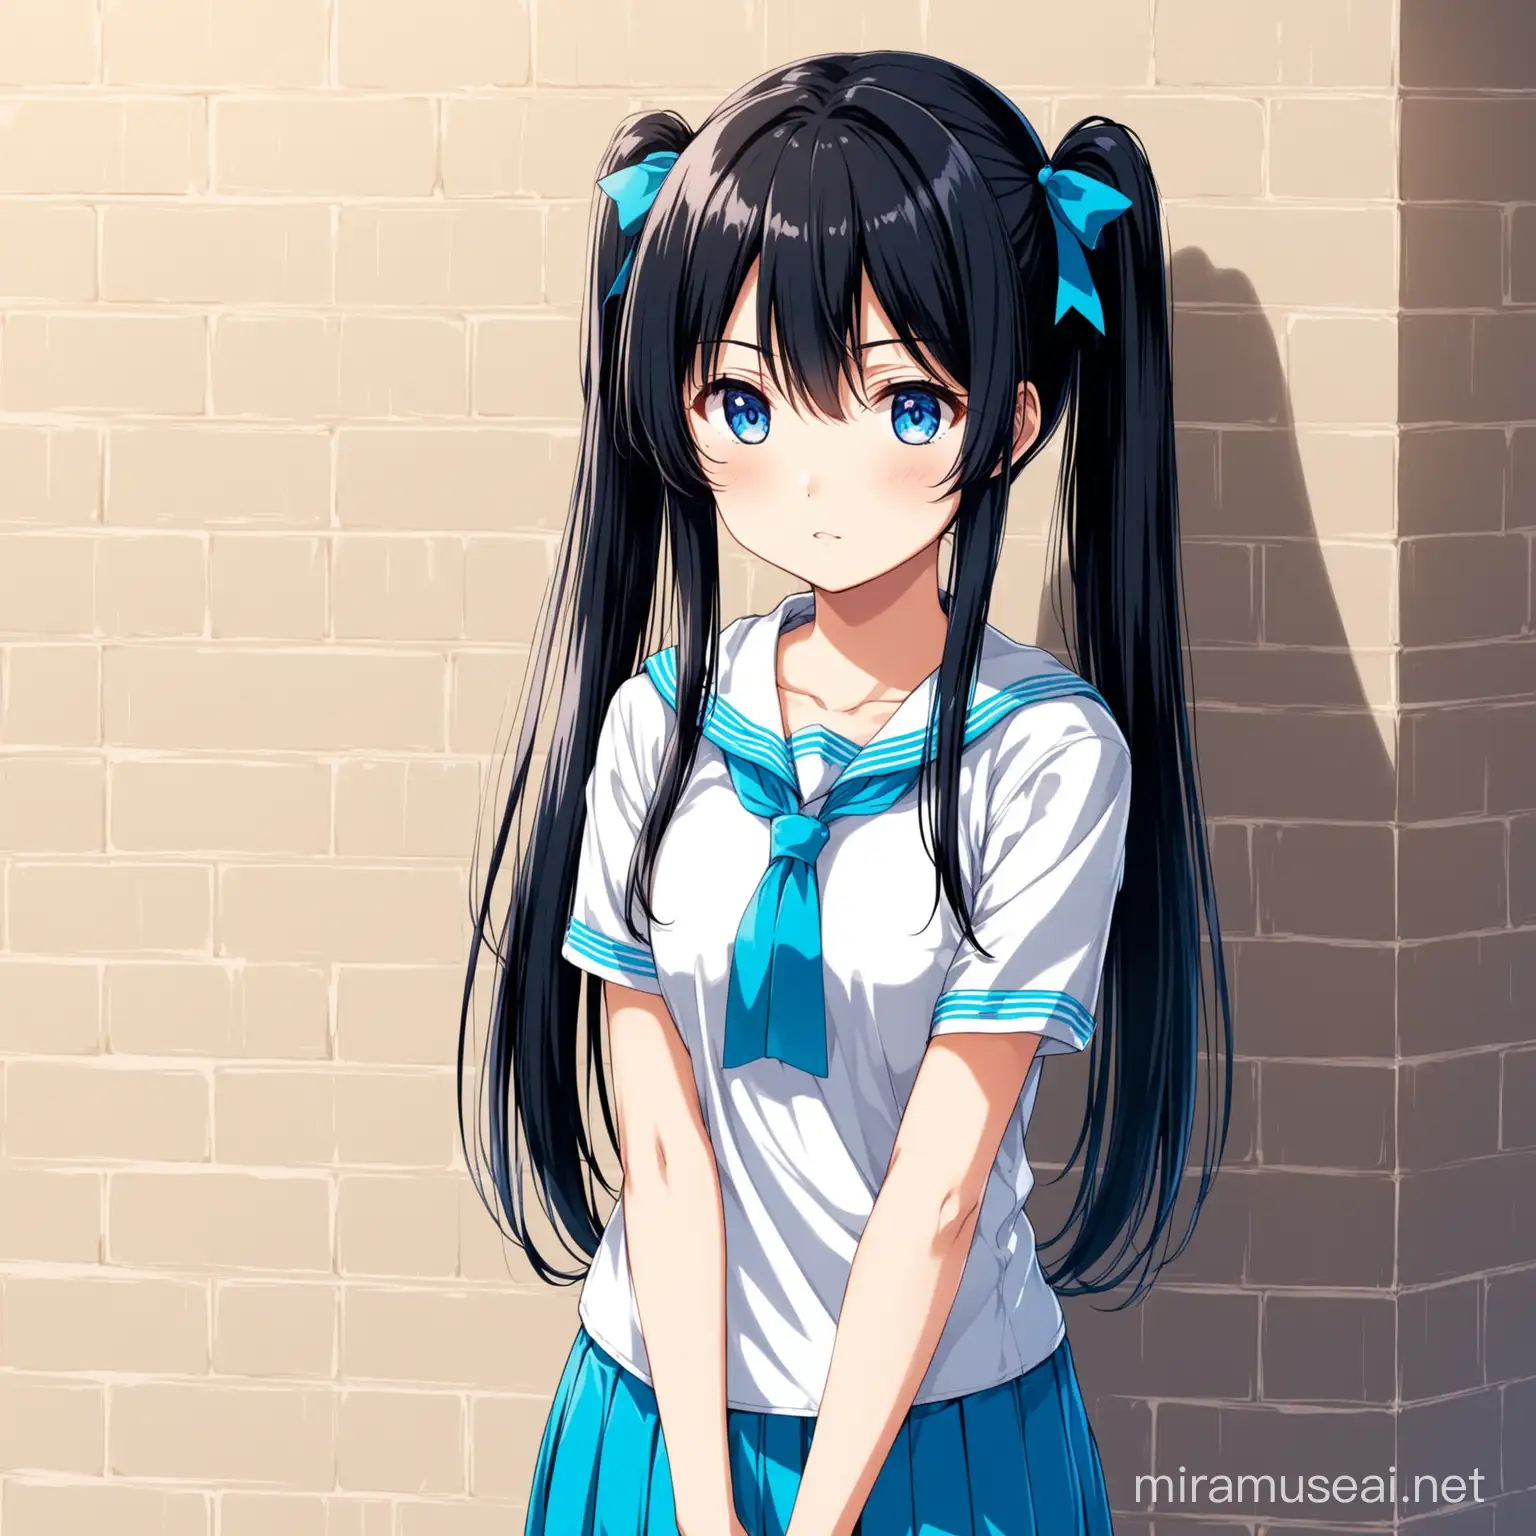 17 years highschooler anime girl black hair blue eyes, twin tail, standing against a wall waiting for someone. 